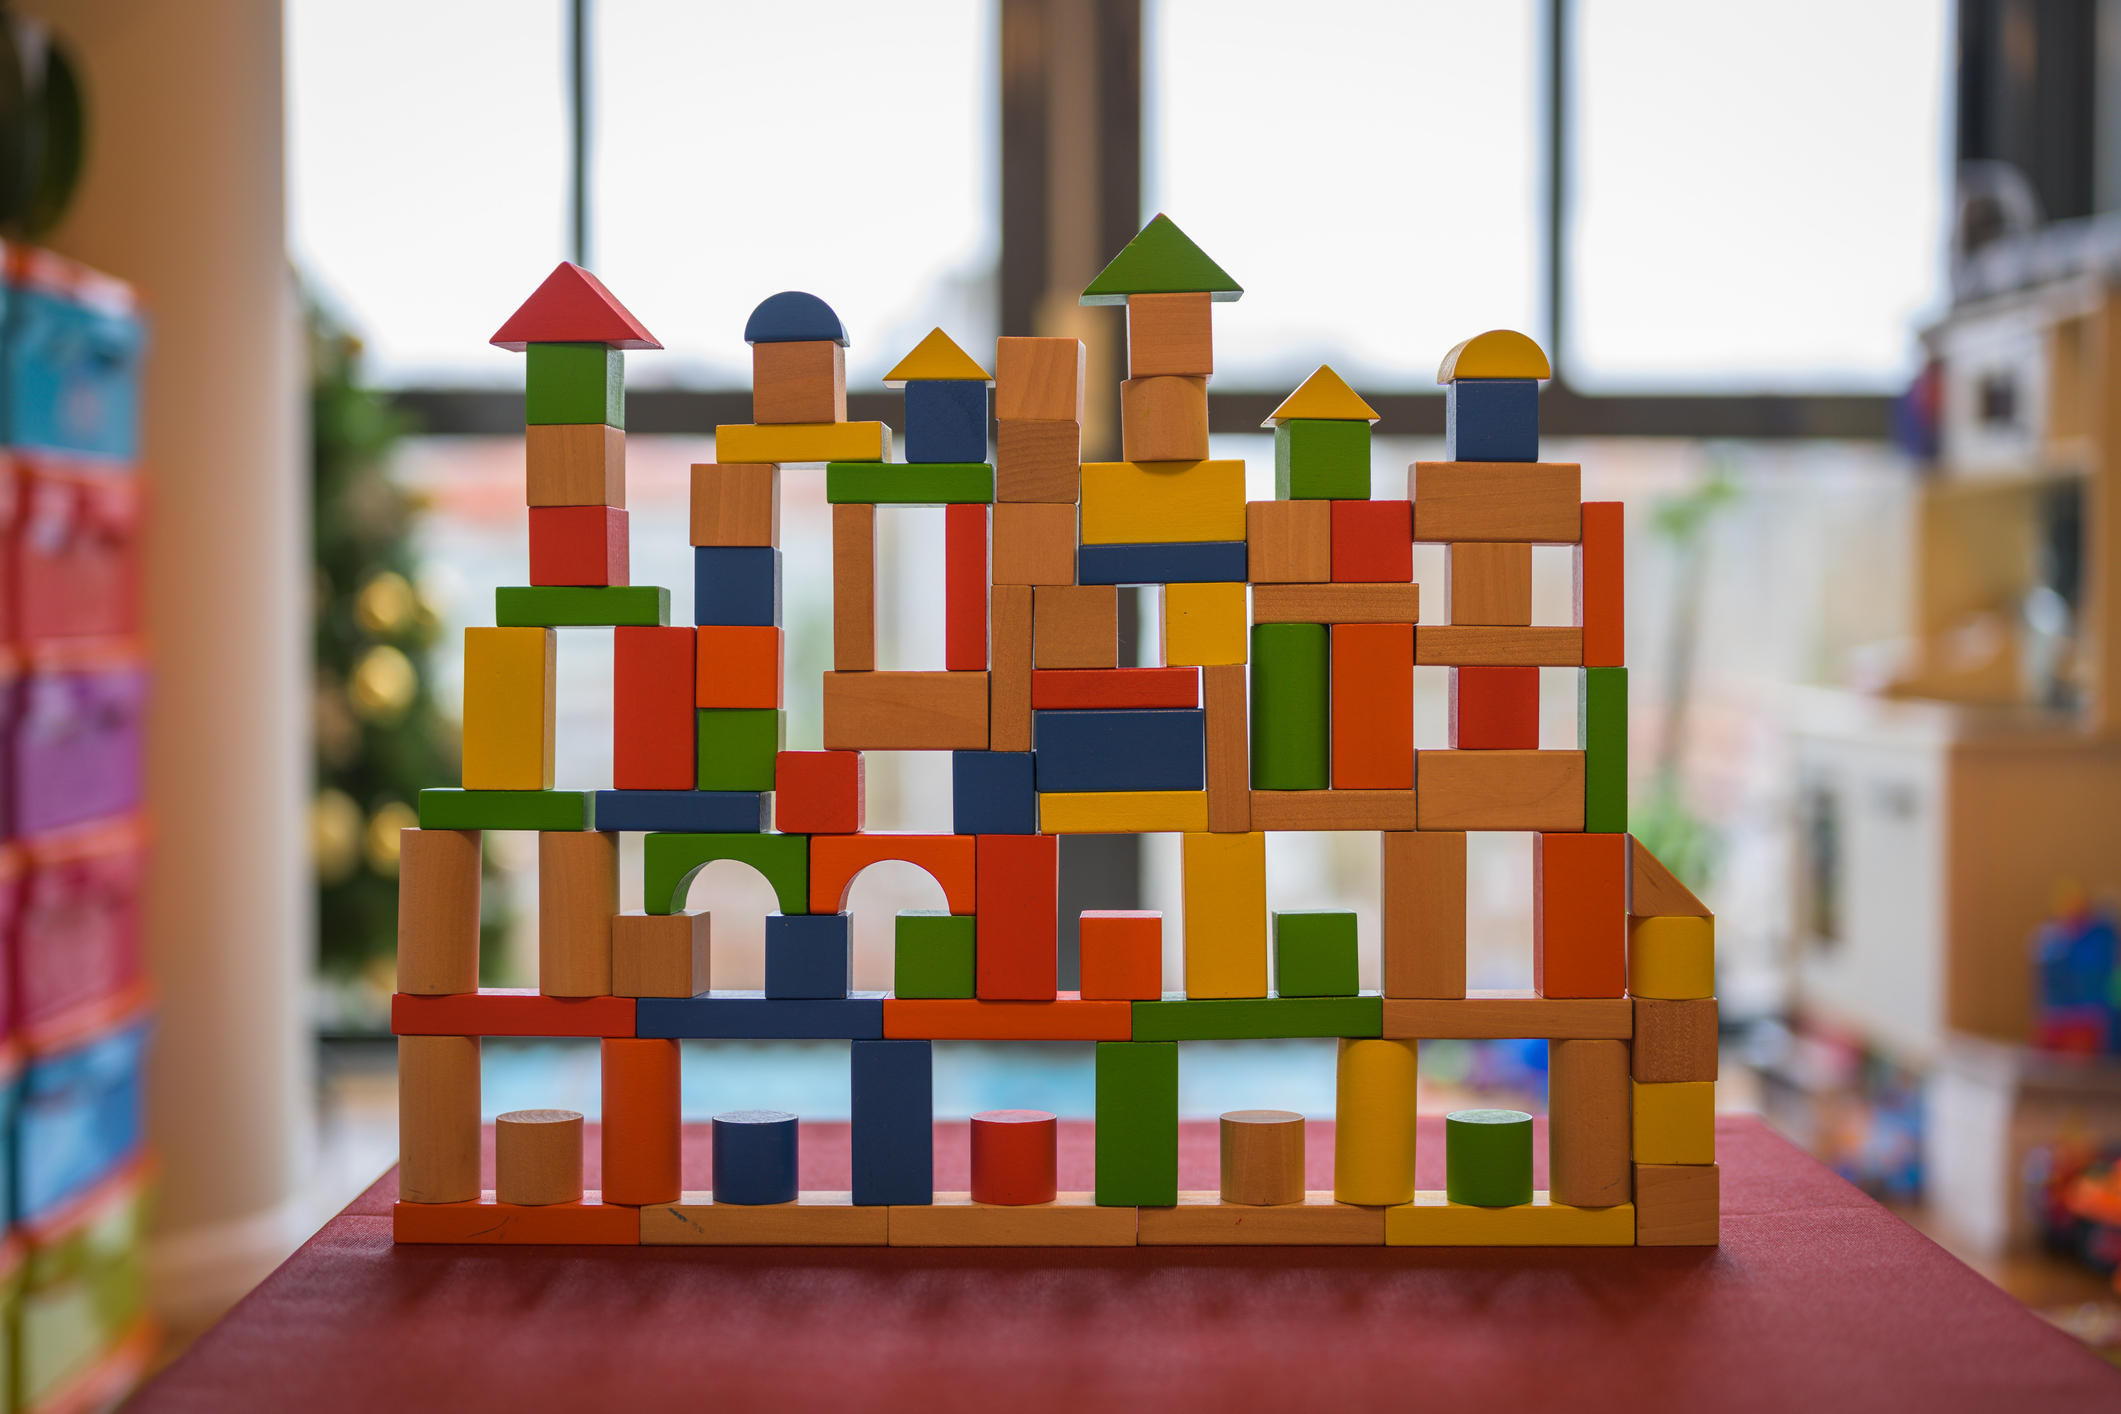 Building made from blocks